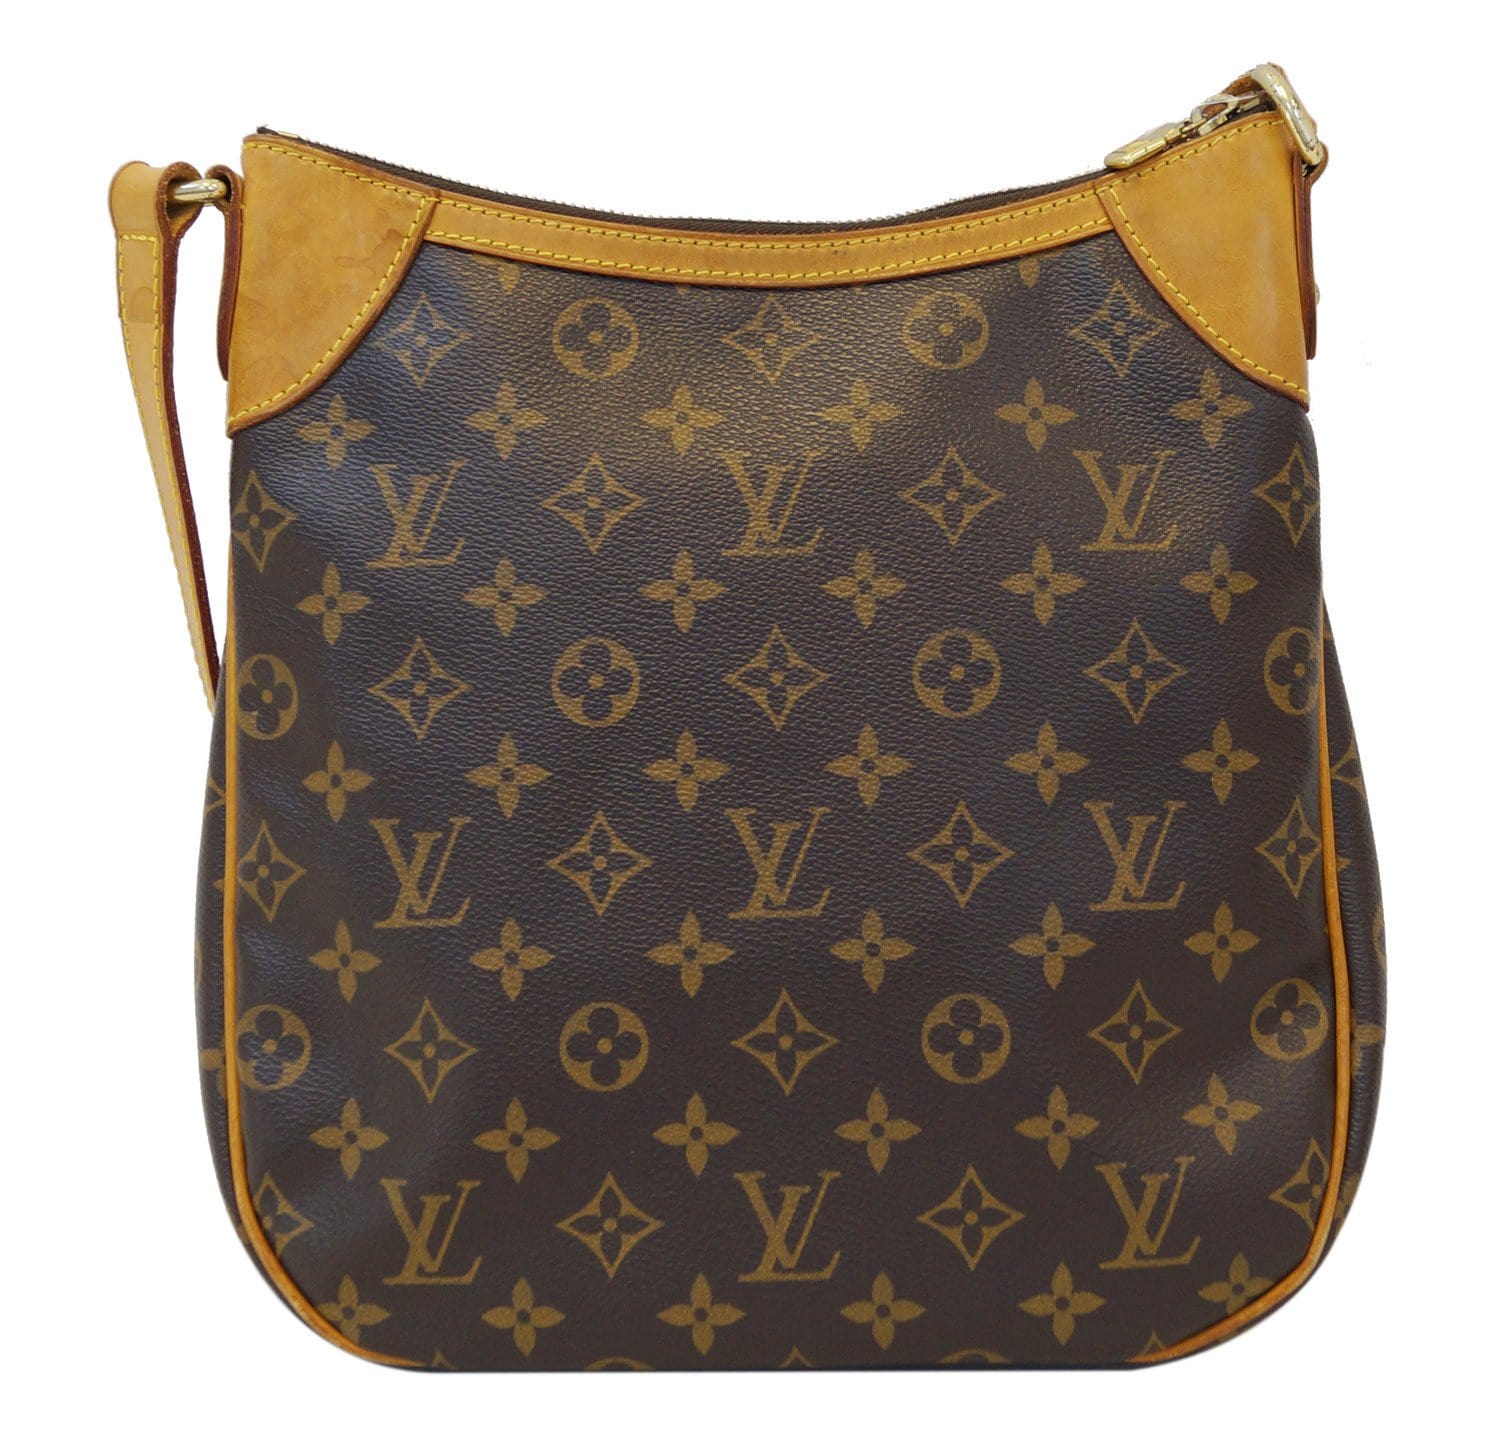 LOUIS VUITTON LOUIS VUITTON Odeon NM PM Shoulder crossbody Bag M45354  Monogram Used LV M45354｜Product Code：2101216931893｜BRAND OFF Online Store